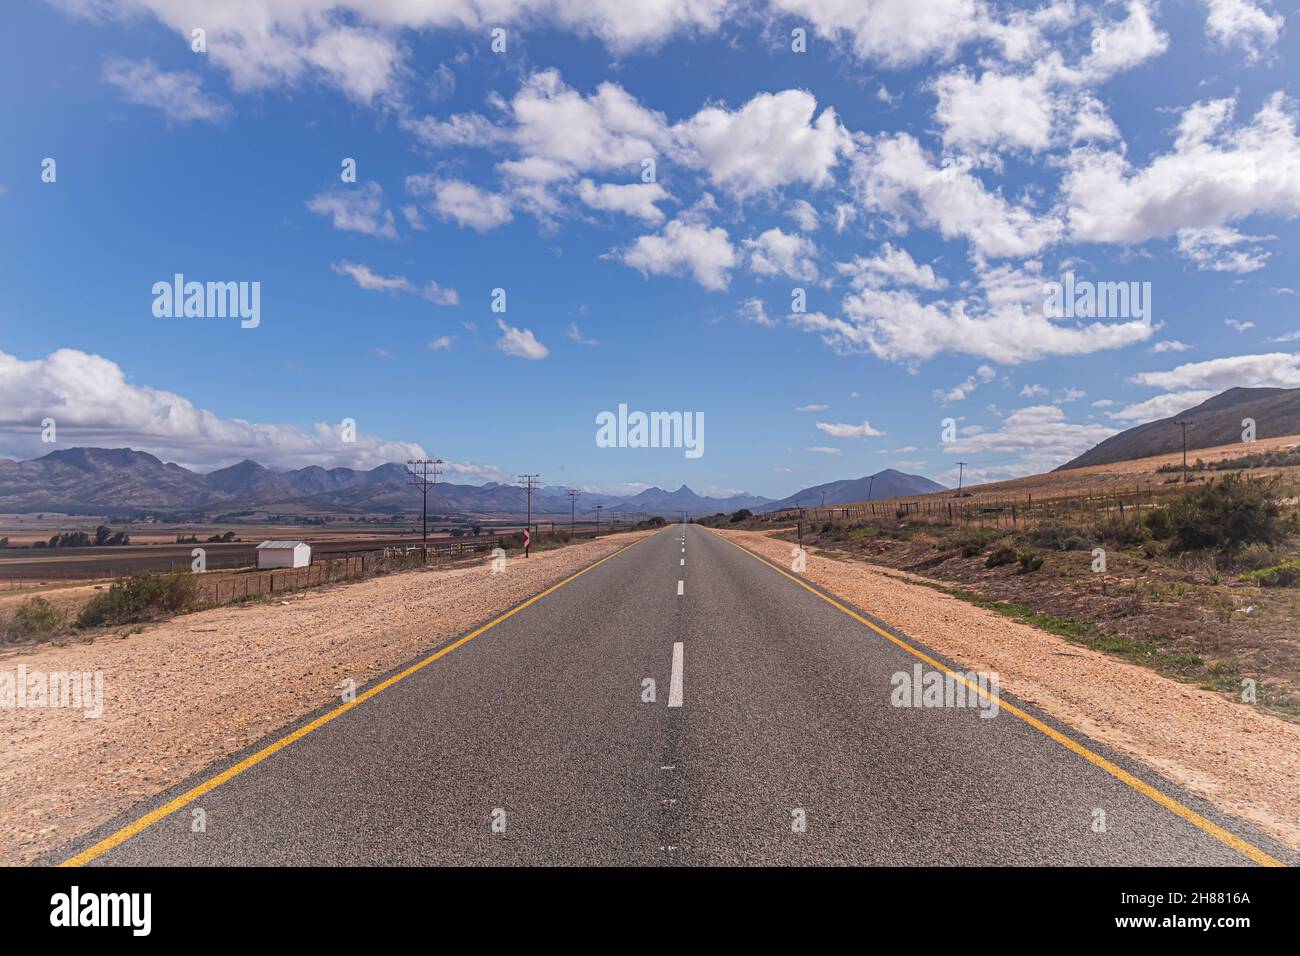 The road of Route 62 through Karoo landscape in South Africa. Stock Photo